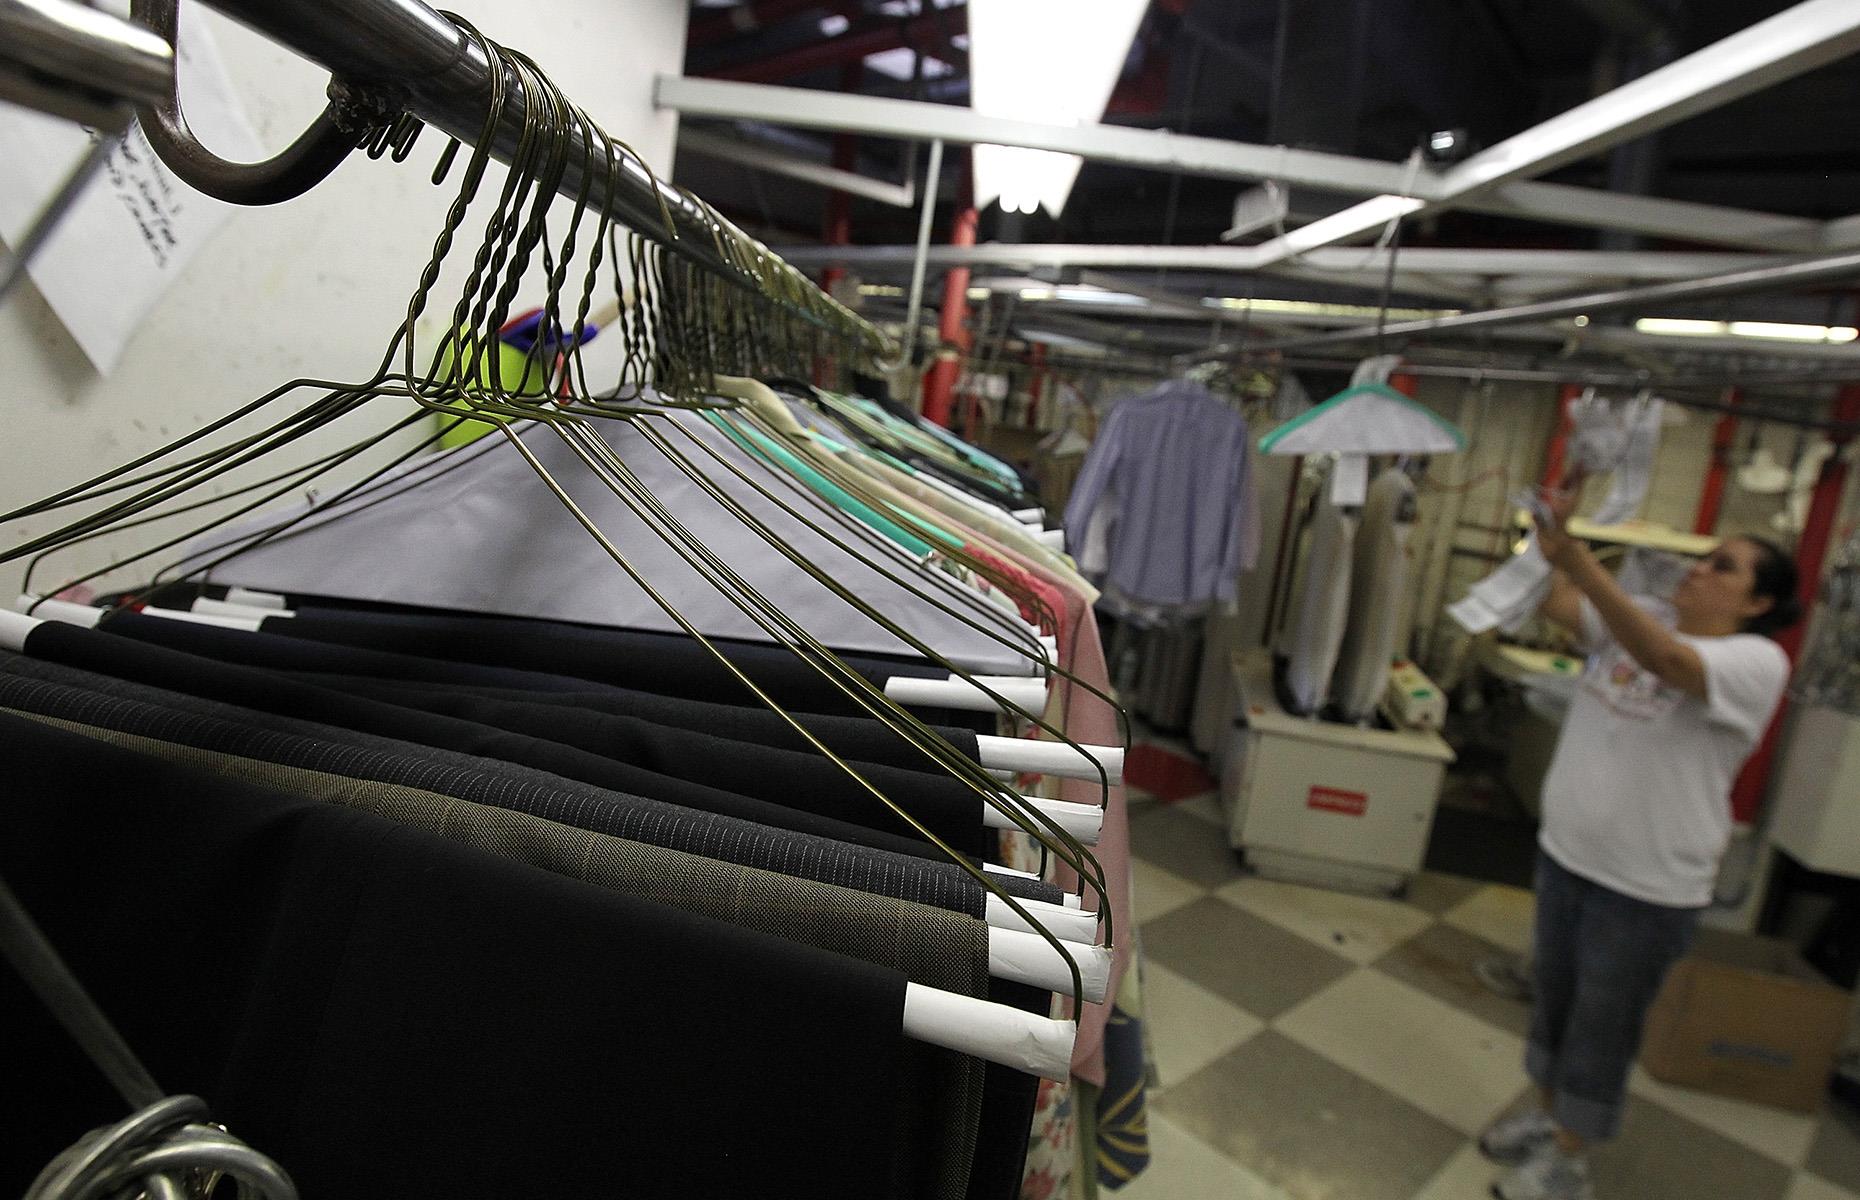 A rather large dry cleaning bill: $54 million (£42.6m)